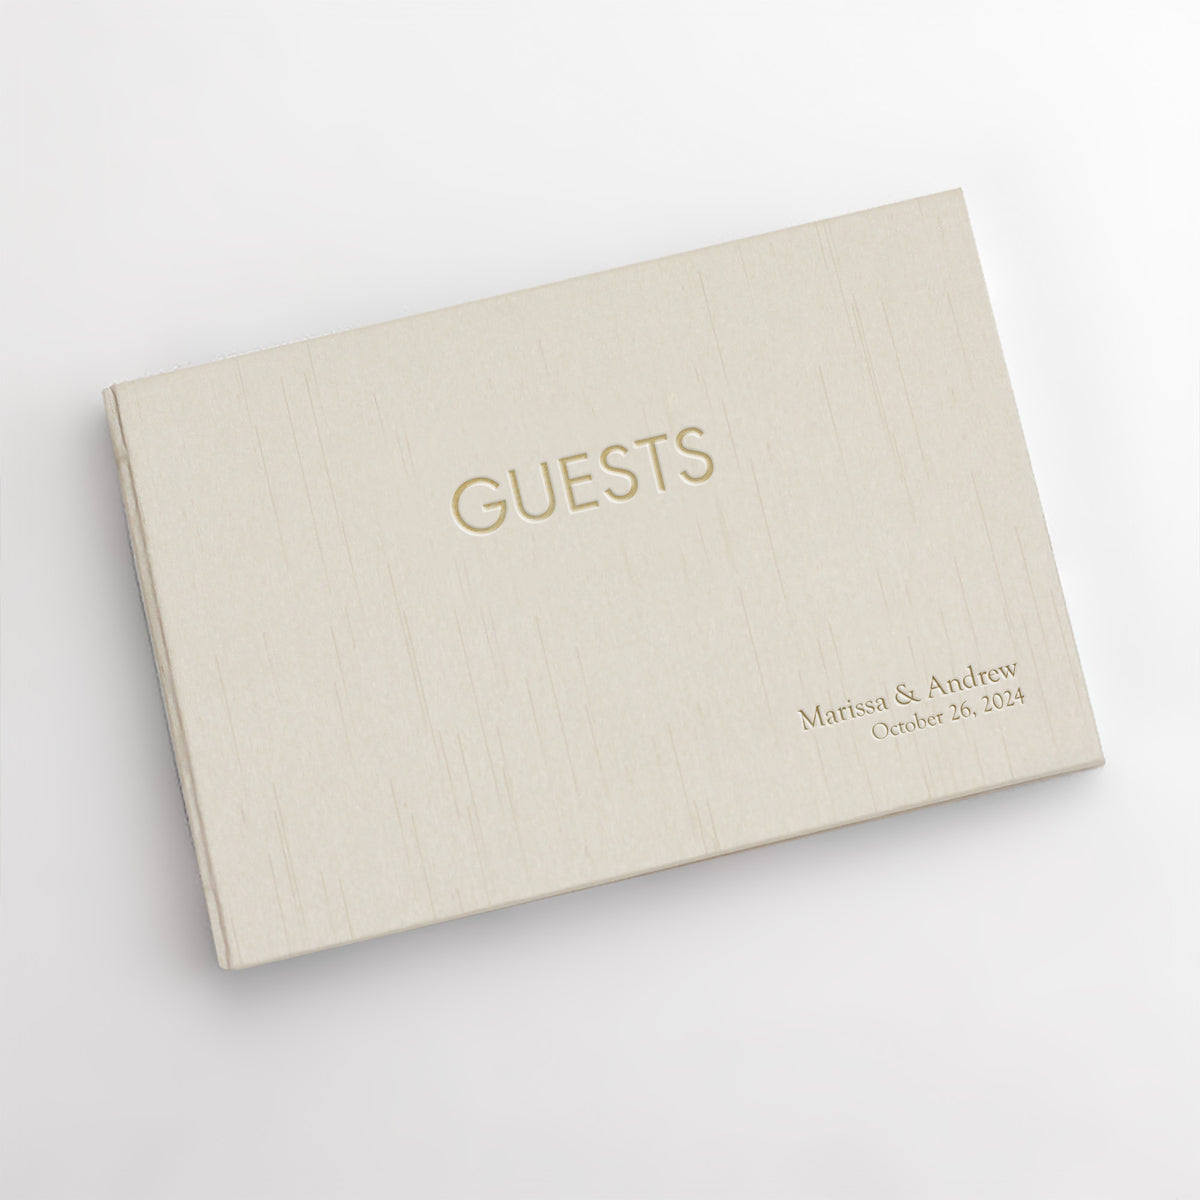 Guestbook Embossed with “Guests” with Champagne Silk Cover